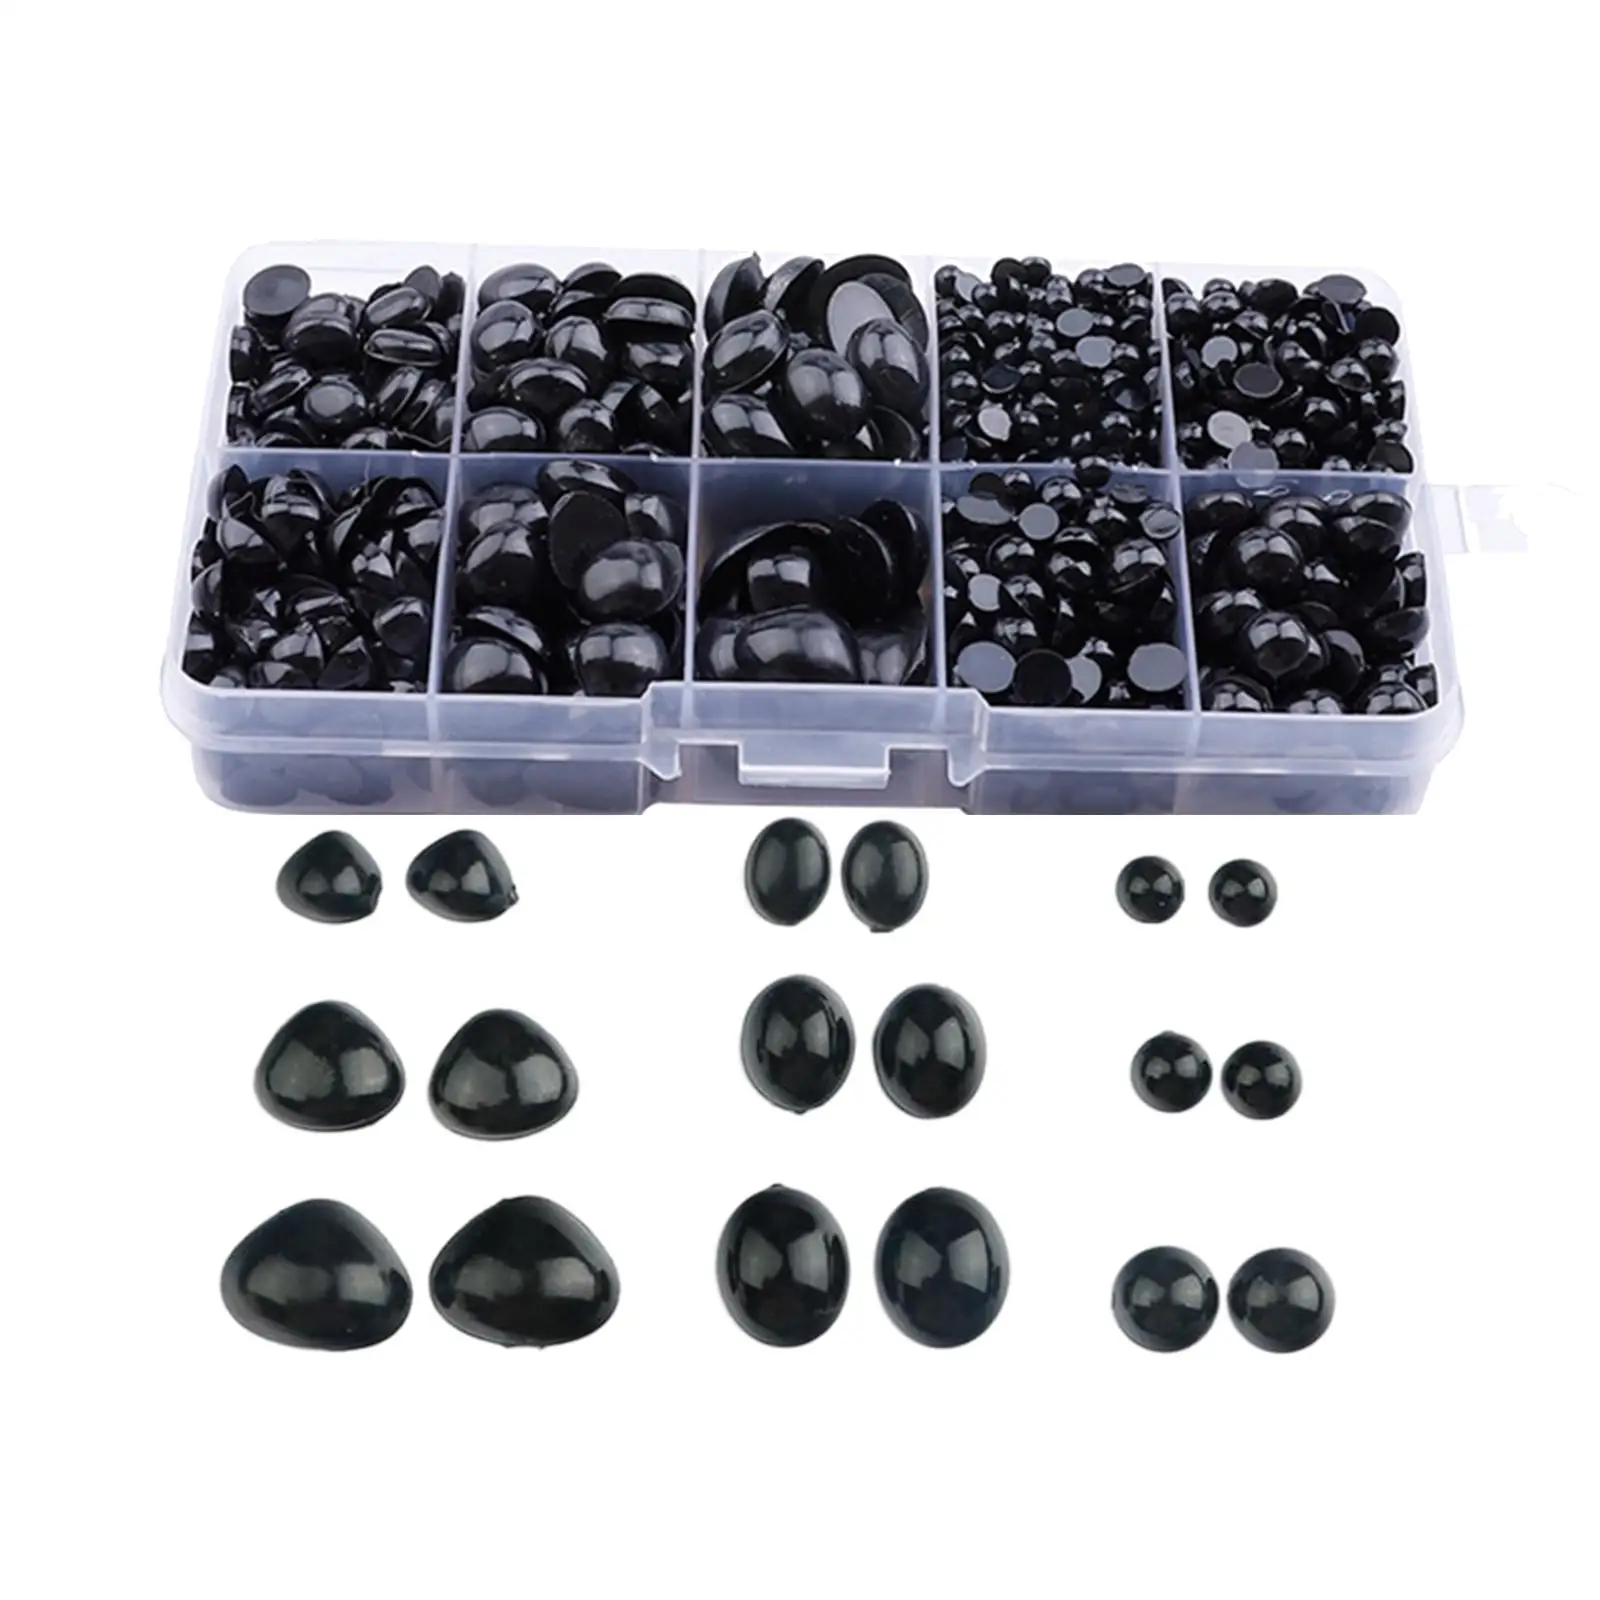 1000Pcs Plastic Safety Eyes and Noses DIY Crafts Eyeball Beads Handmade Craft Doll Eyes for Crochet Toy Bear Stuffed Animals